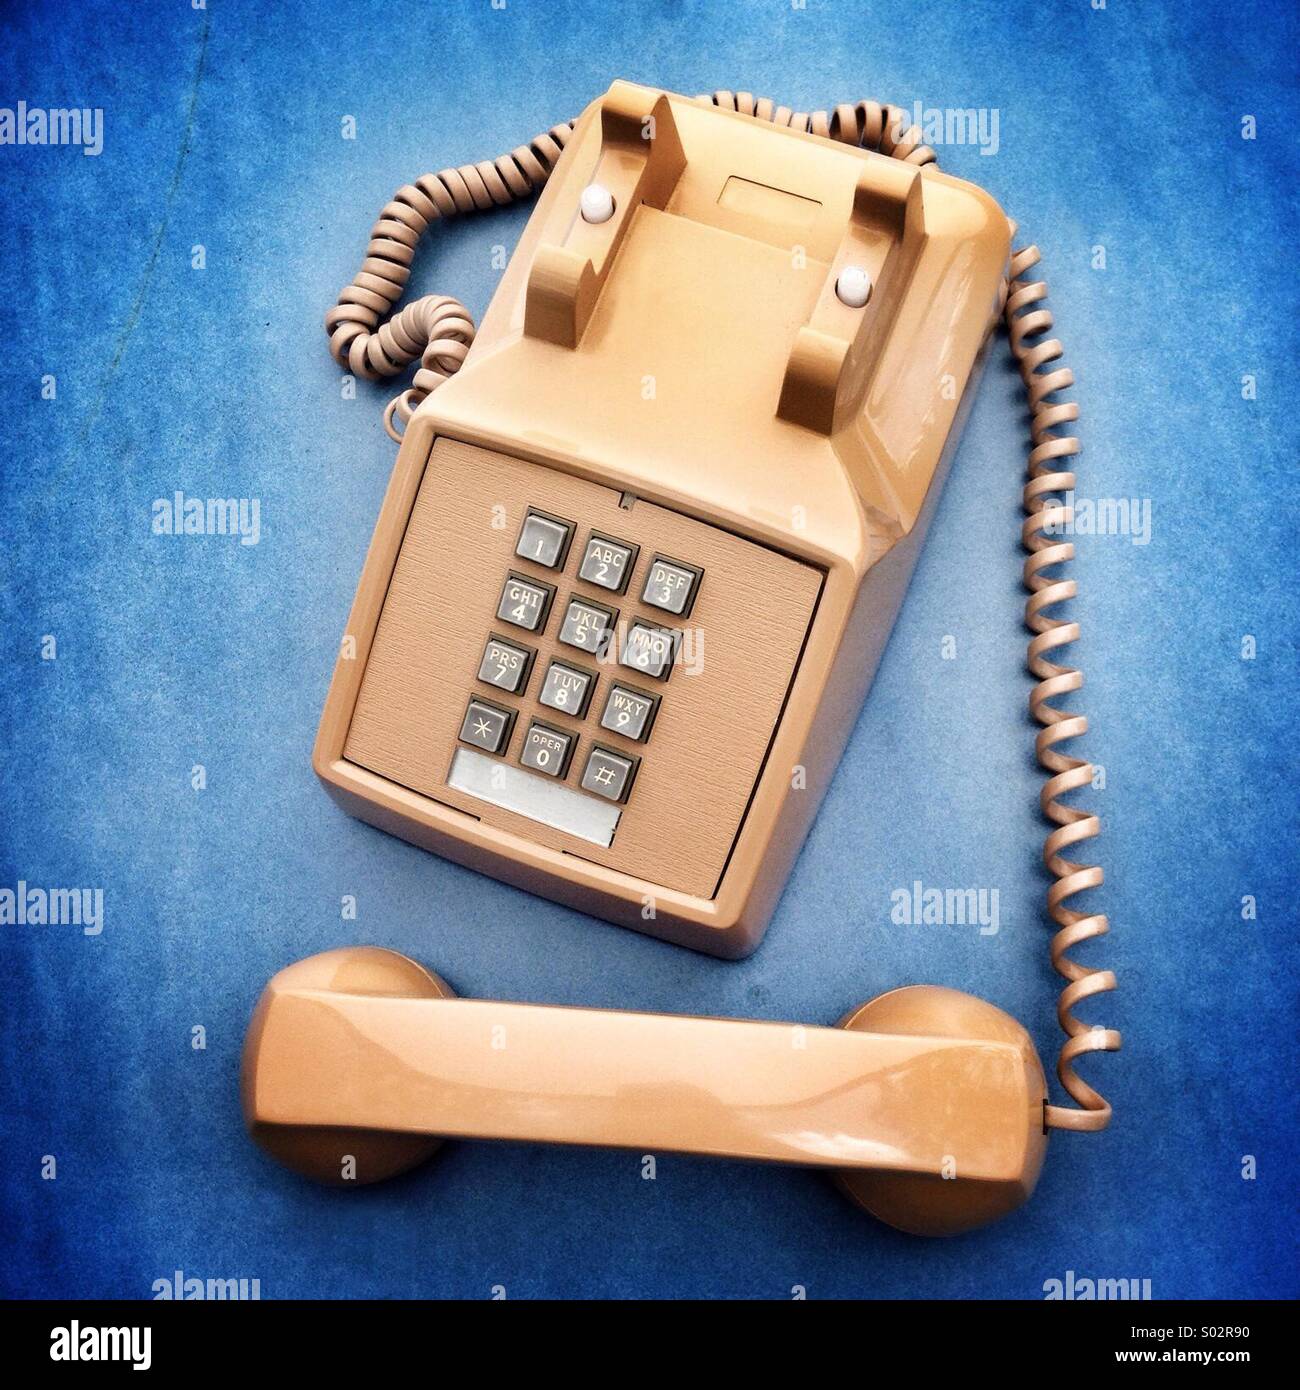 Retro office phone with handset off. Punch button dialing. Stock Photo